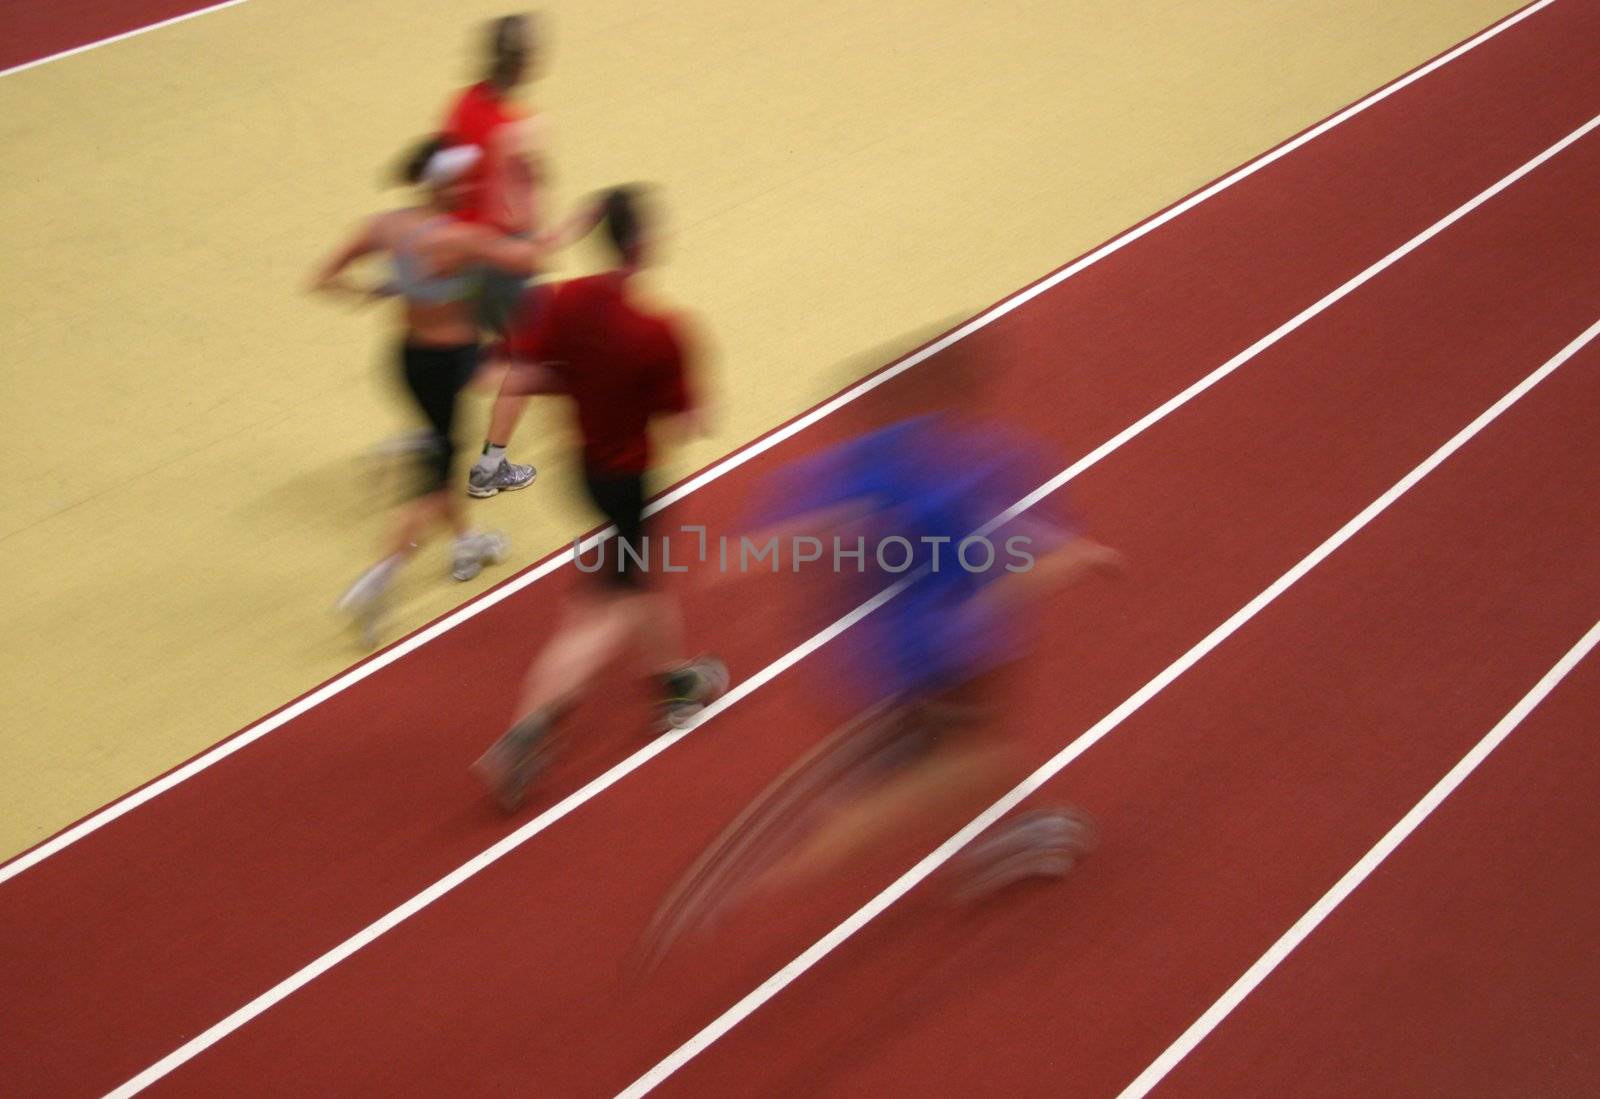 Motion blurred athletes competing on the track